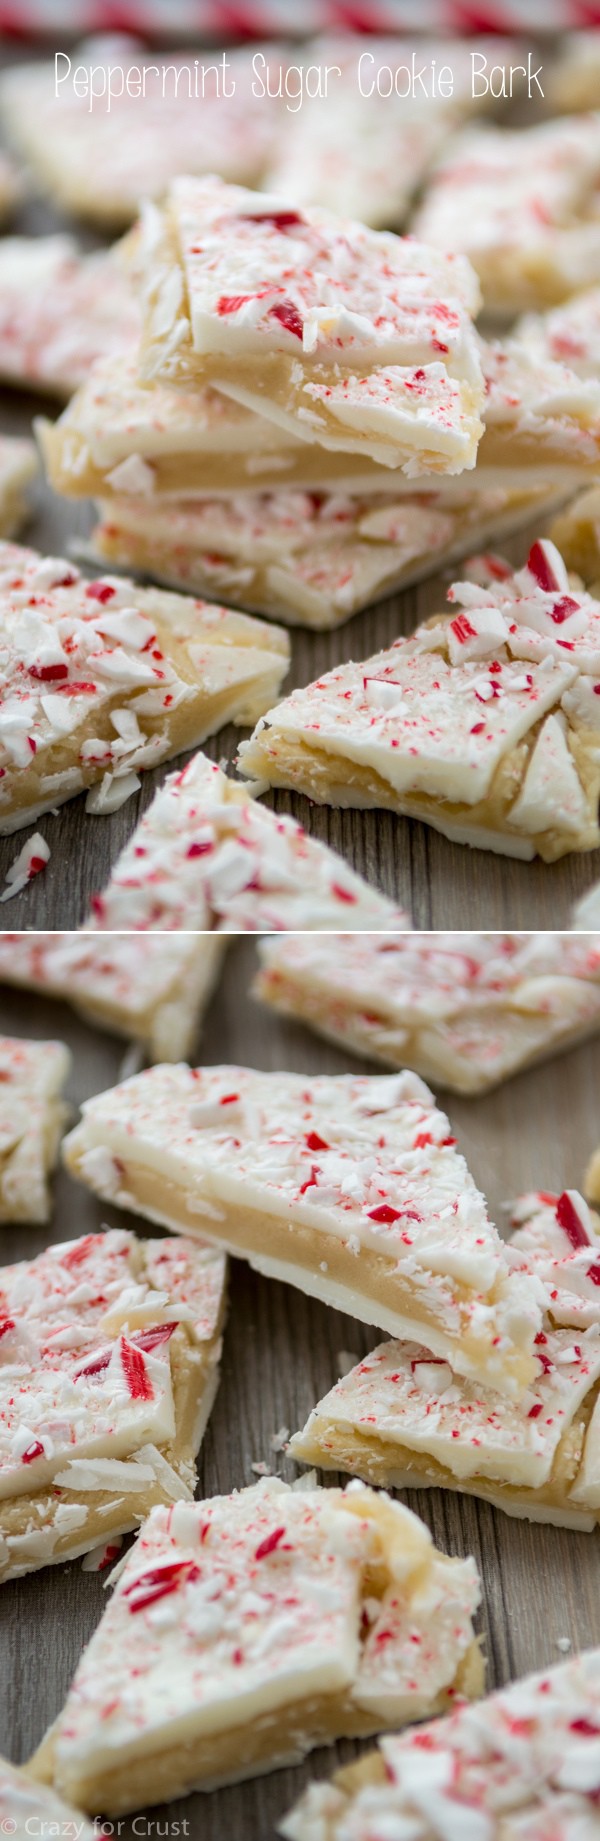 Peppermint Sugar Cookie Dough Bark - a layer of eggles sugar cookie dough between white chocolate and topped with crushed candy canes!